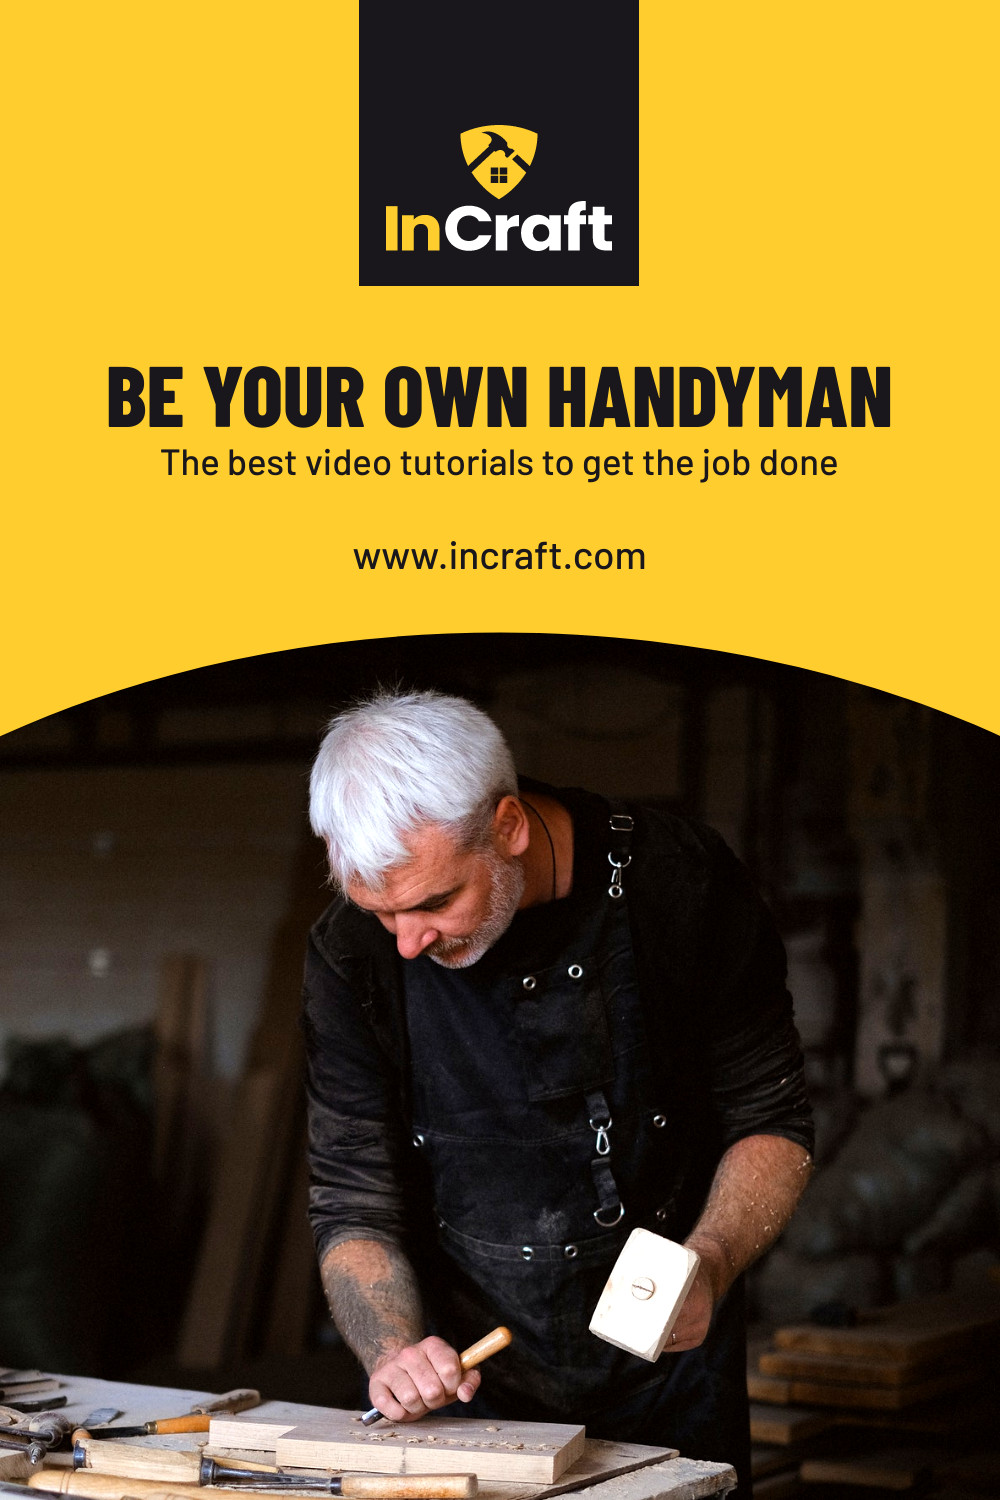 Be Your Own Handyman